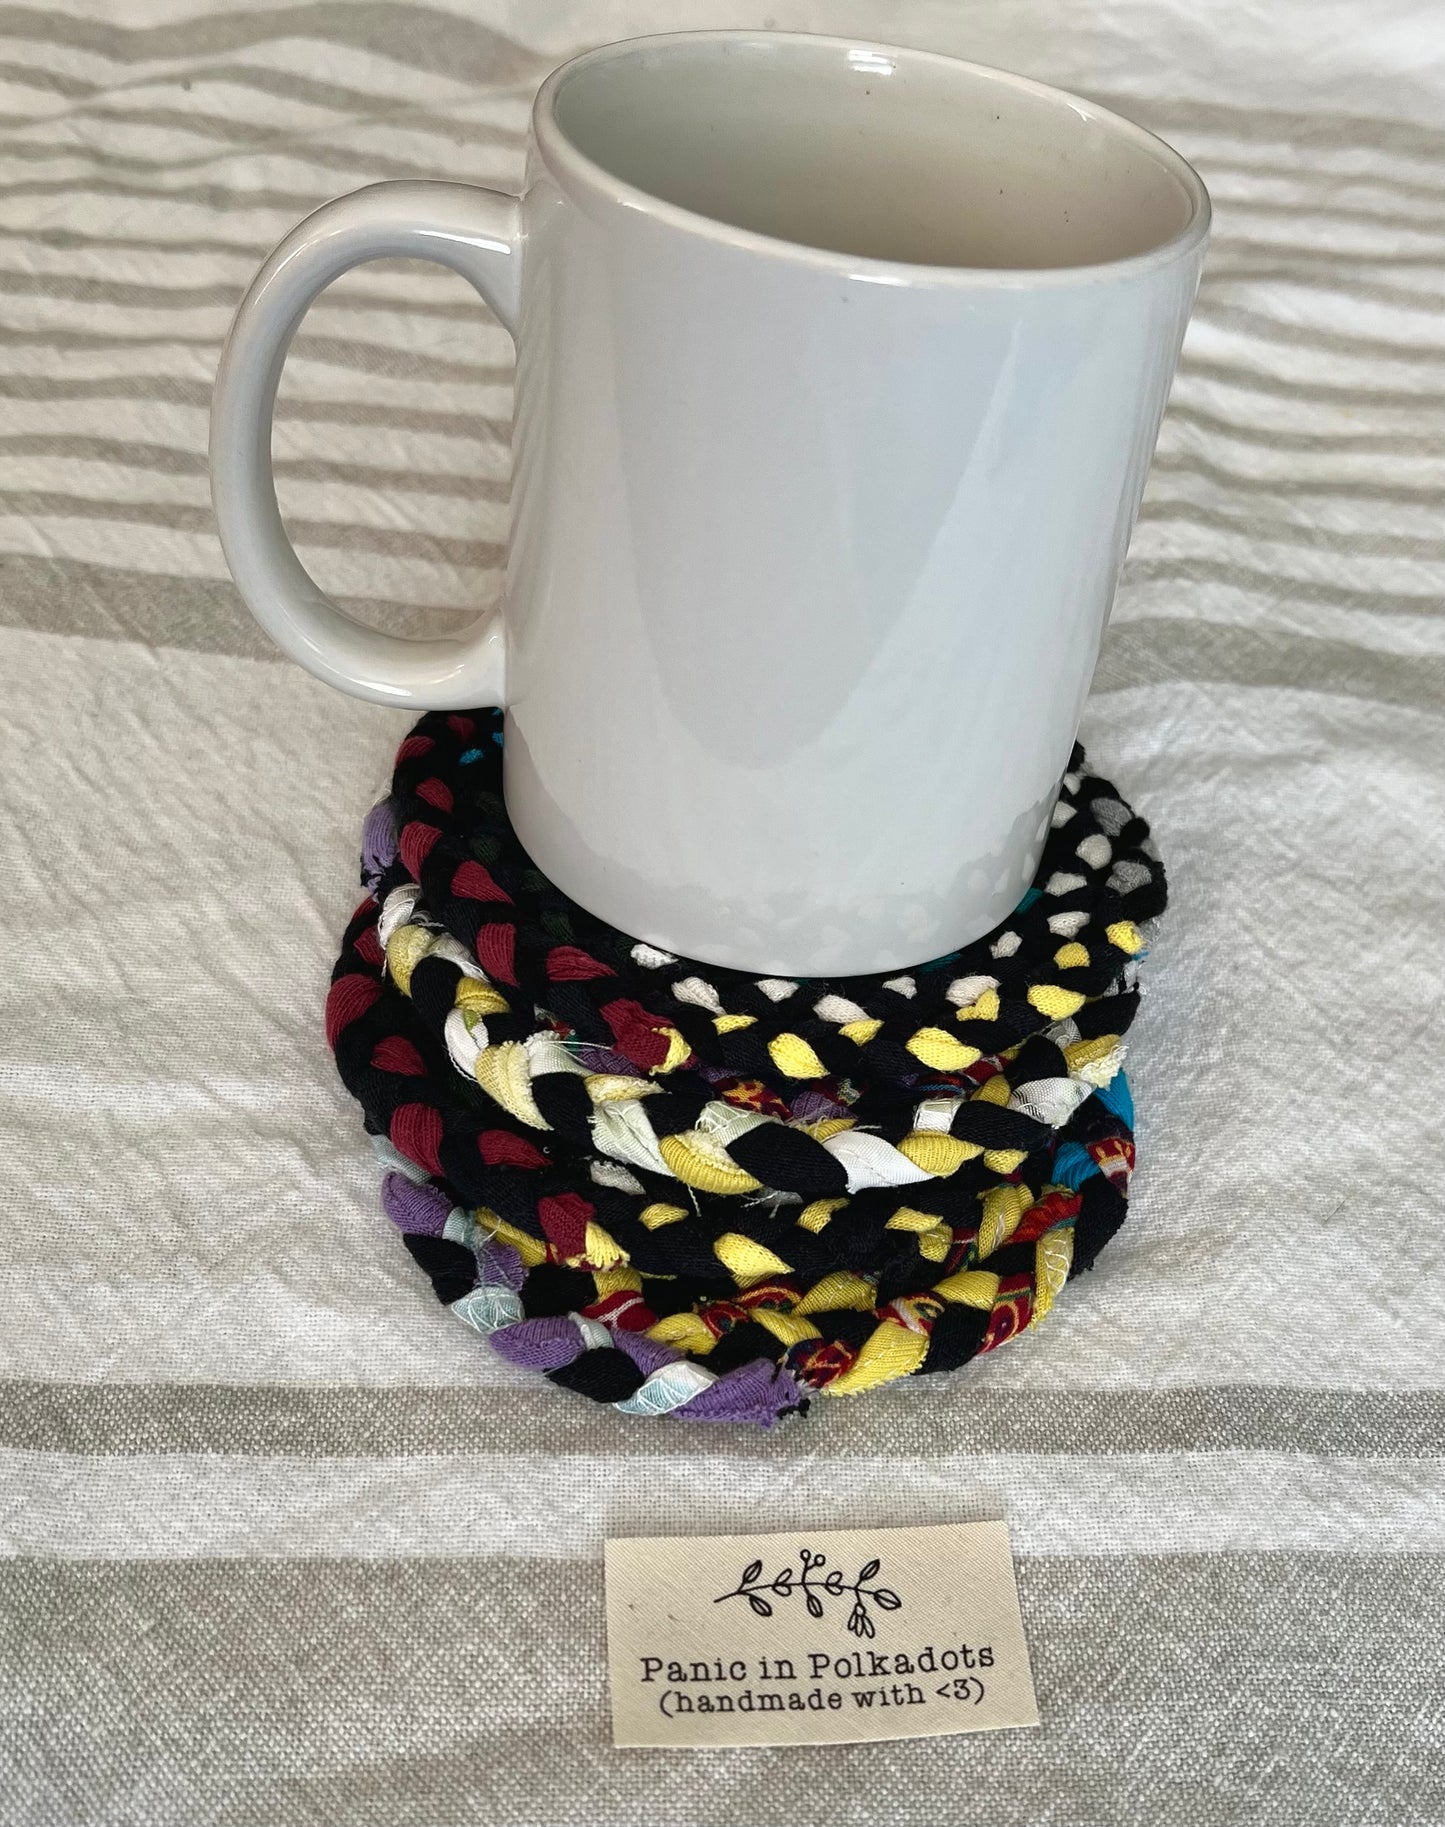 Mini rug coaster set, in a stack, with a white coffee mug on top, for scale and usage idea.